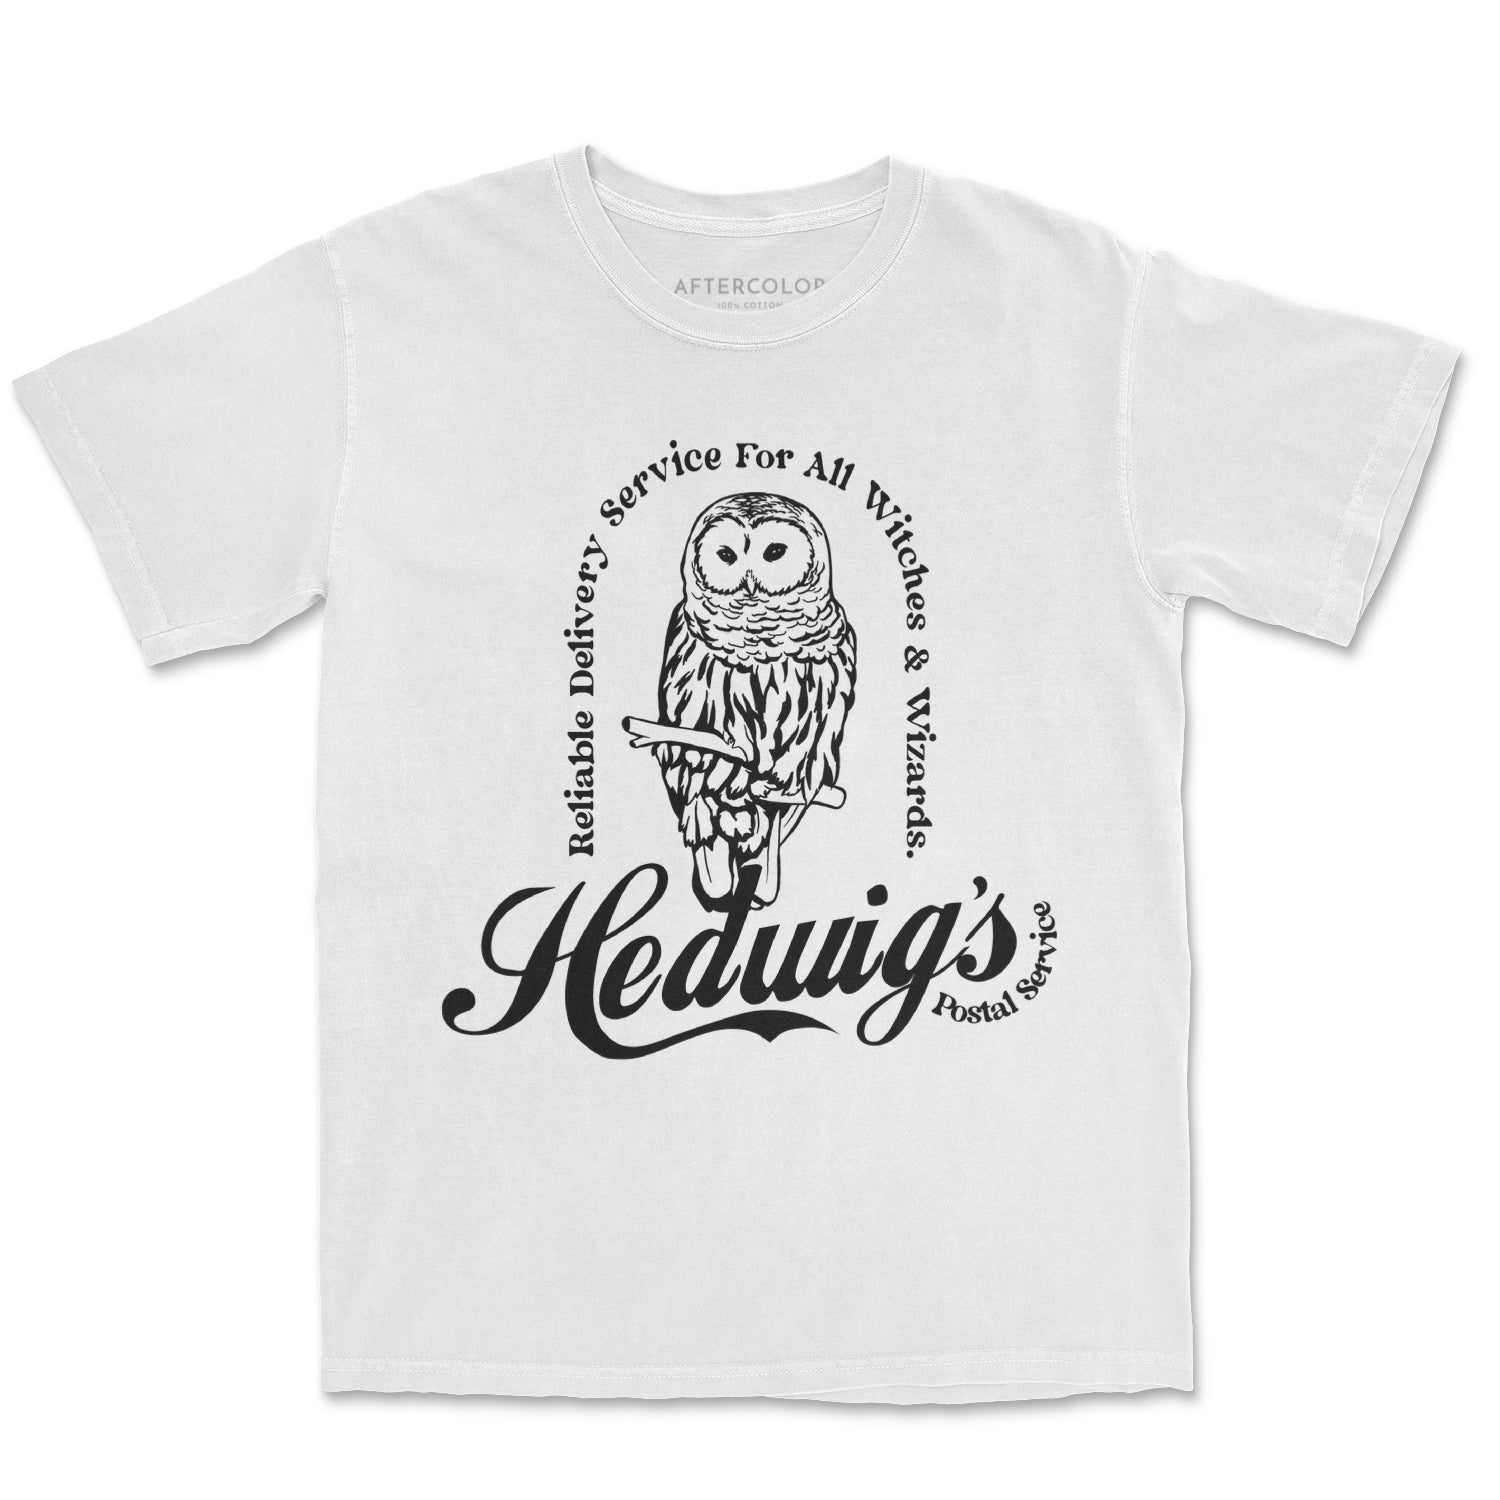 Hedwig's Postal Service Garment Dyed Tee